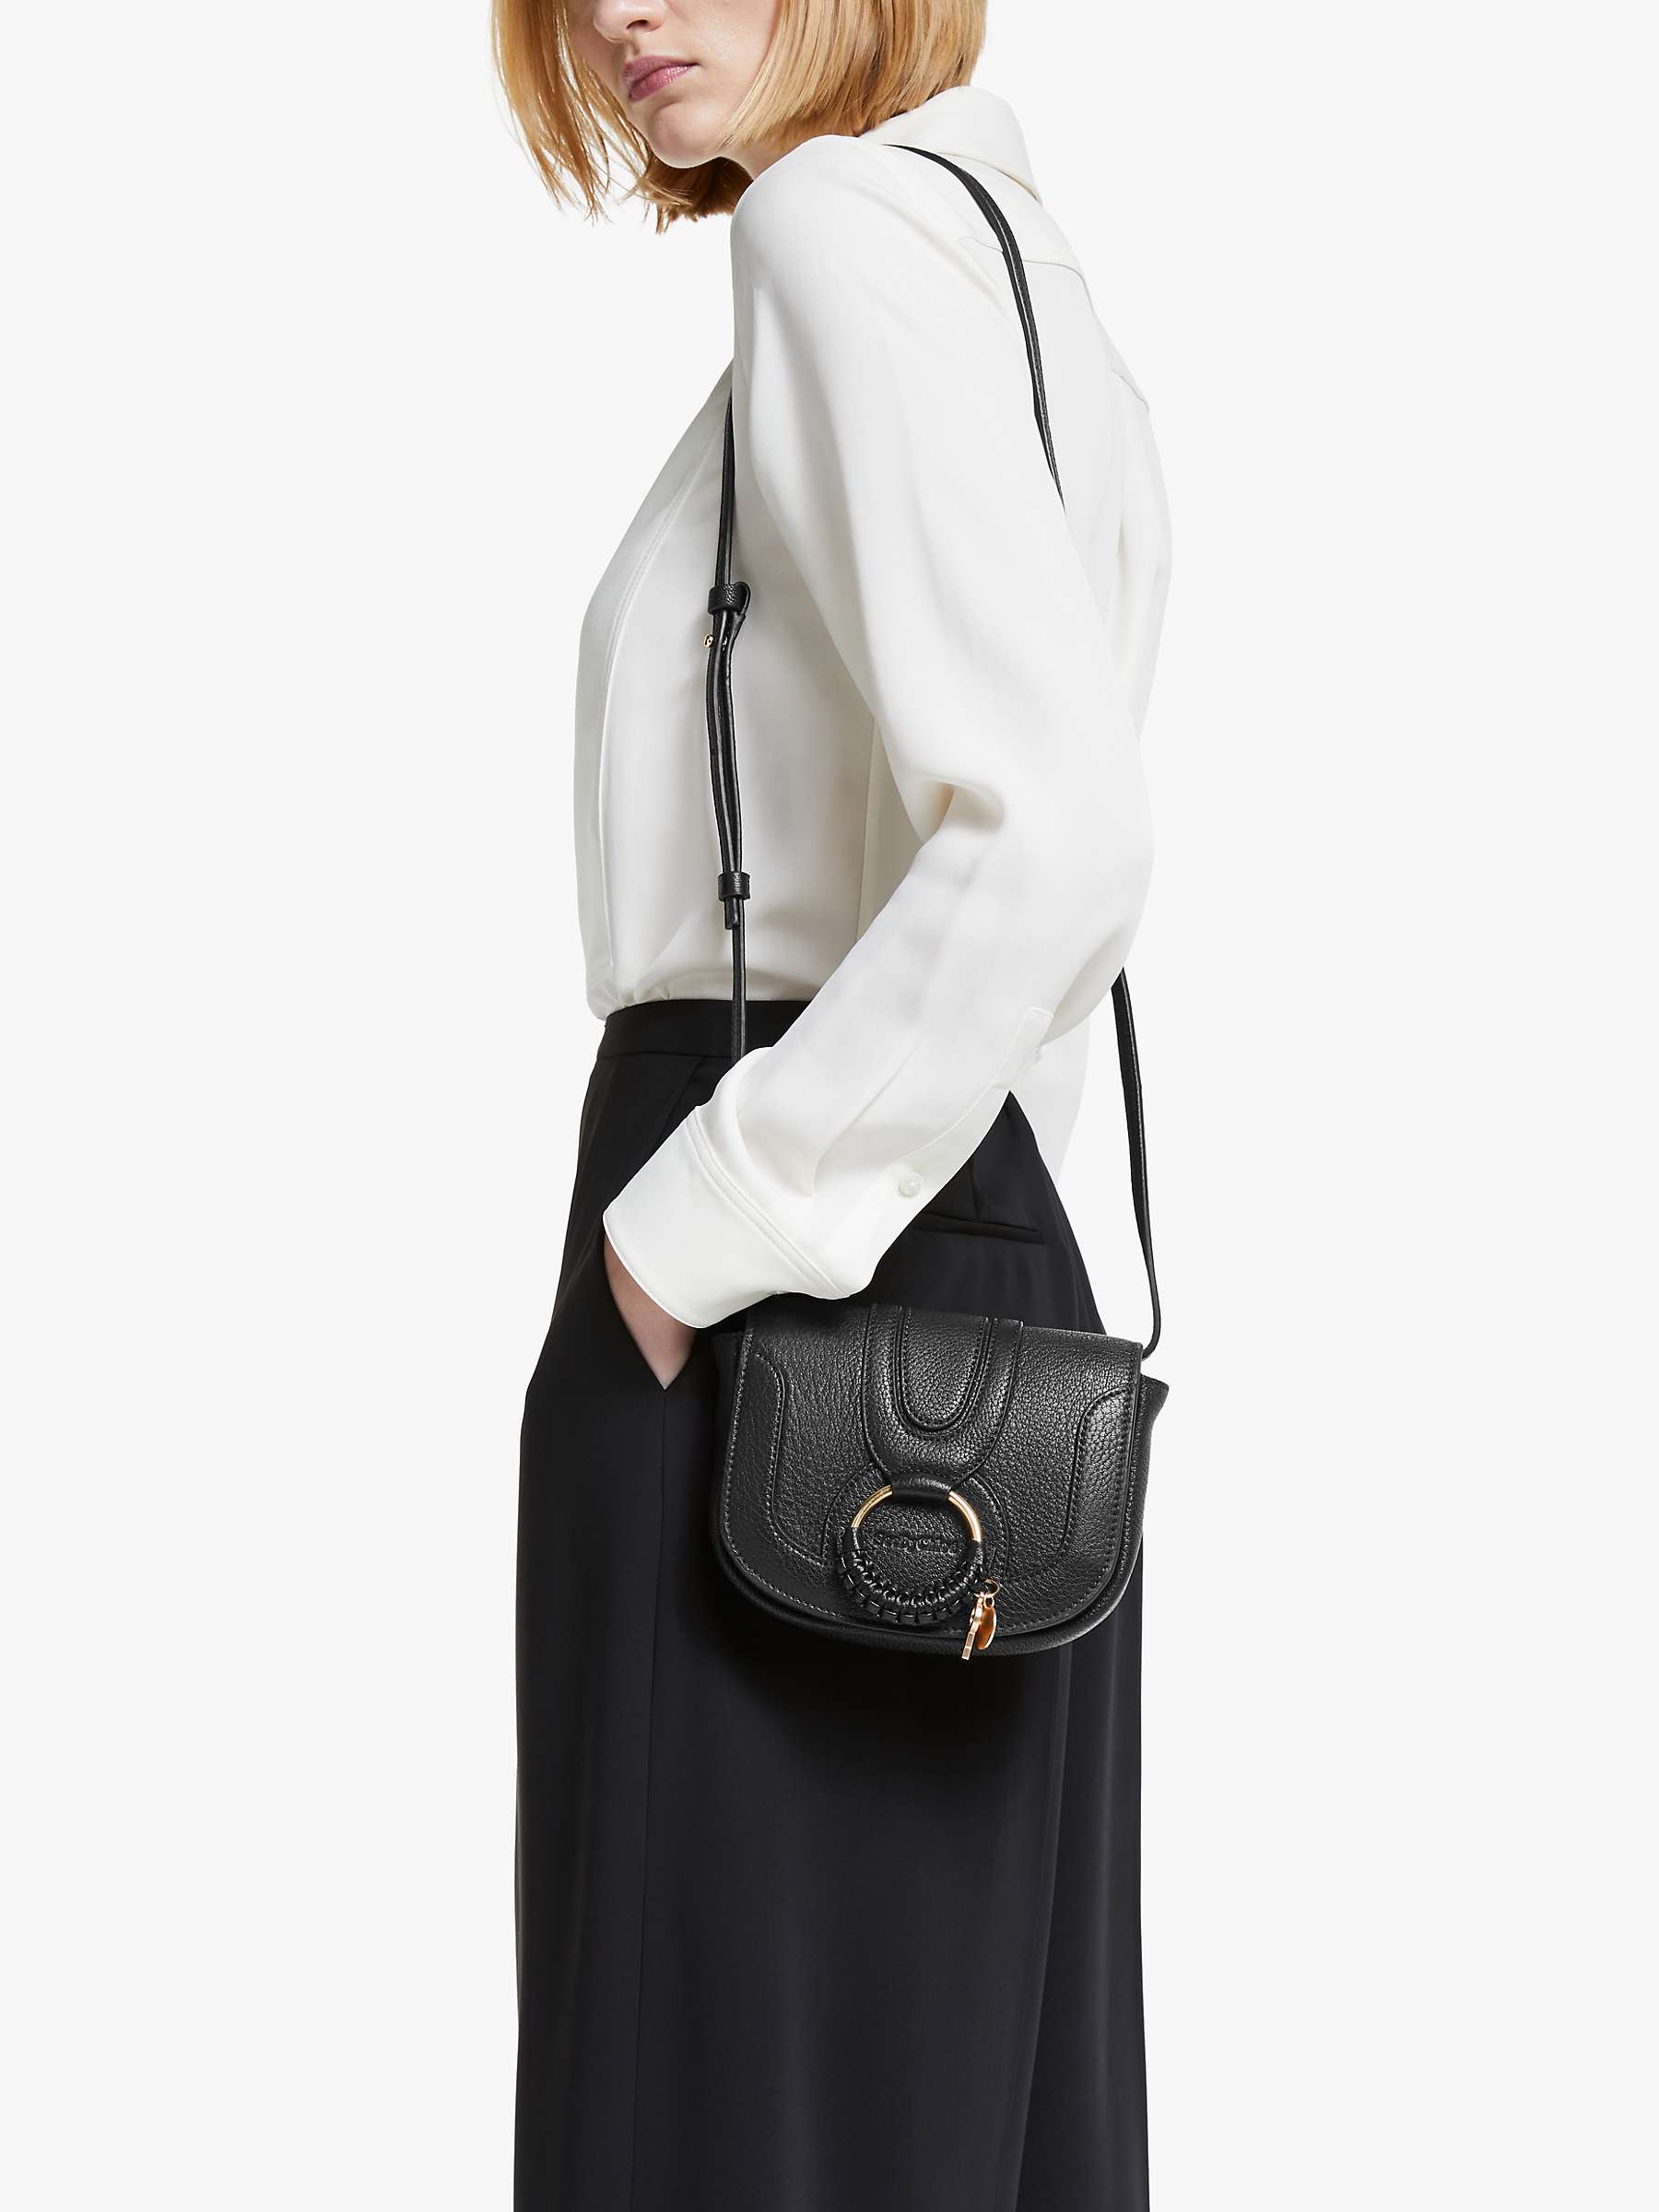 Buy See By Chloé Mini Hana Leather Satchel Bag Online at johnlewis.com